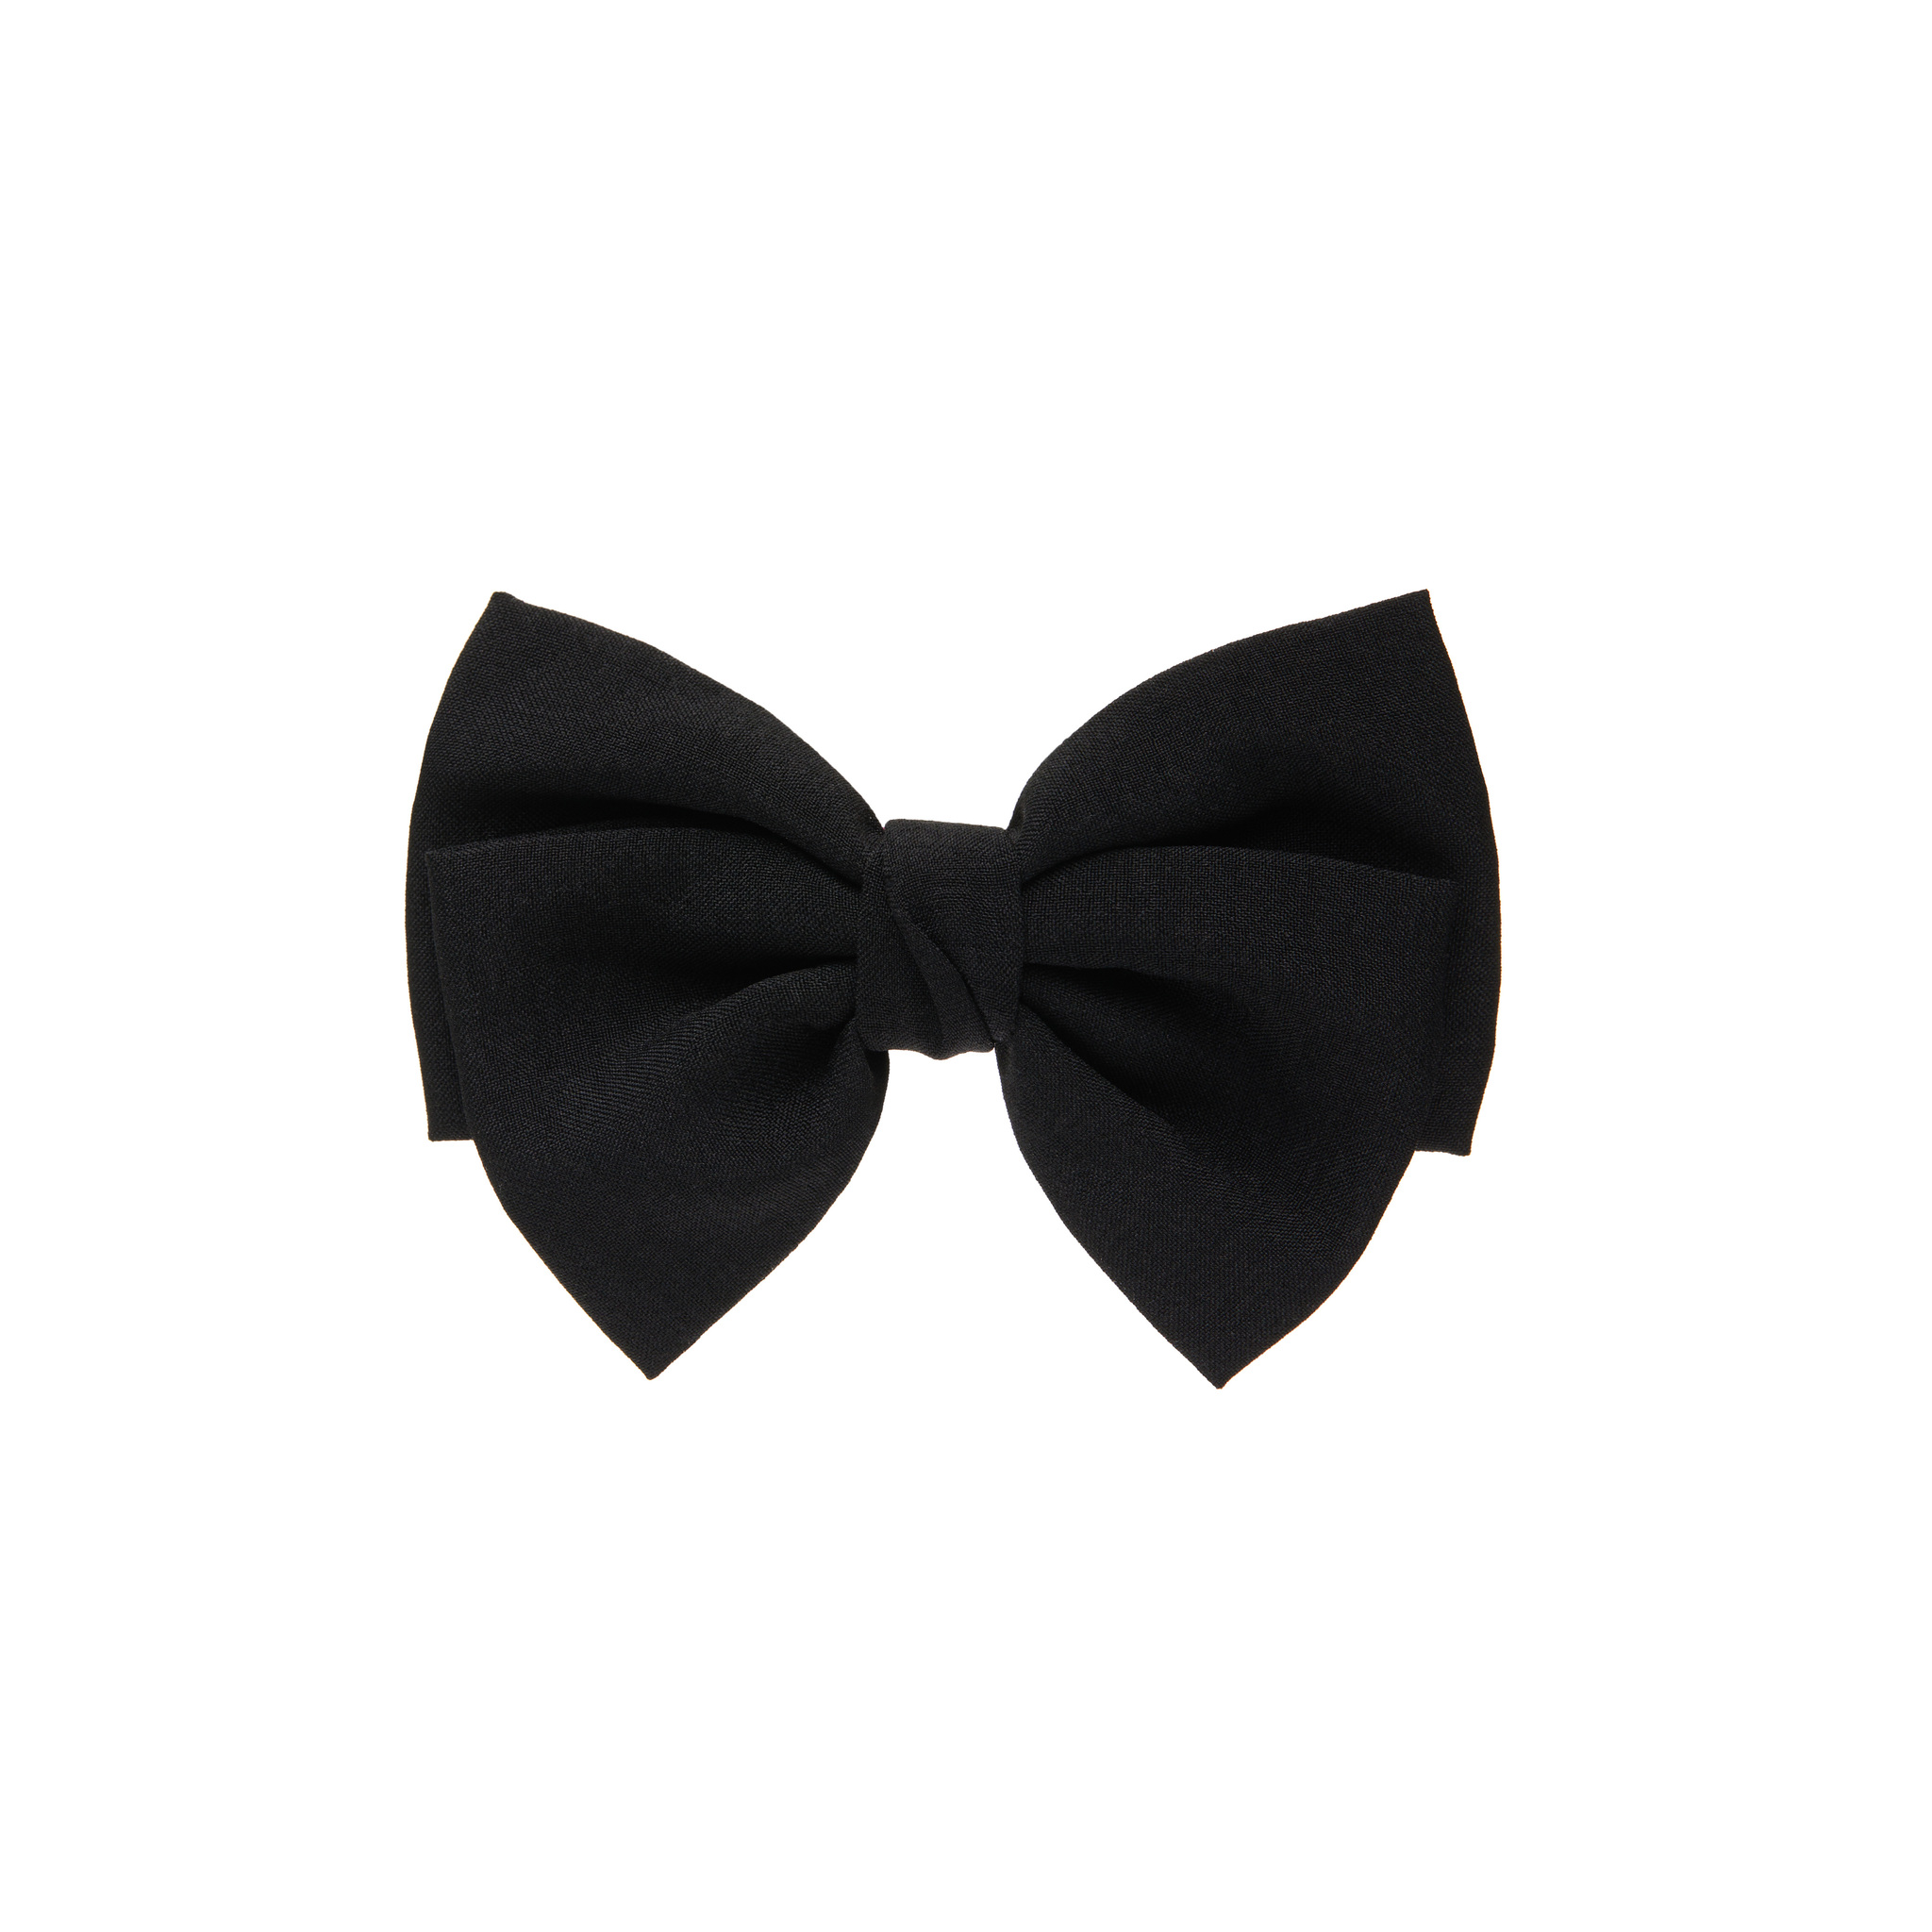 HOLLY JUNE Заколка Bow Hair Clip – Black holly june заколка bow hair clip – red